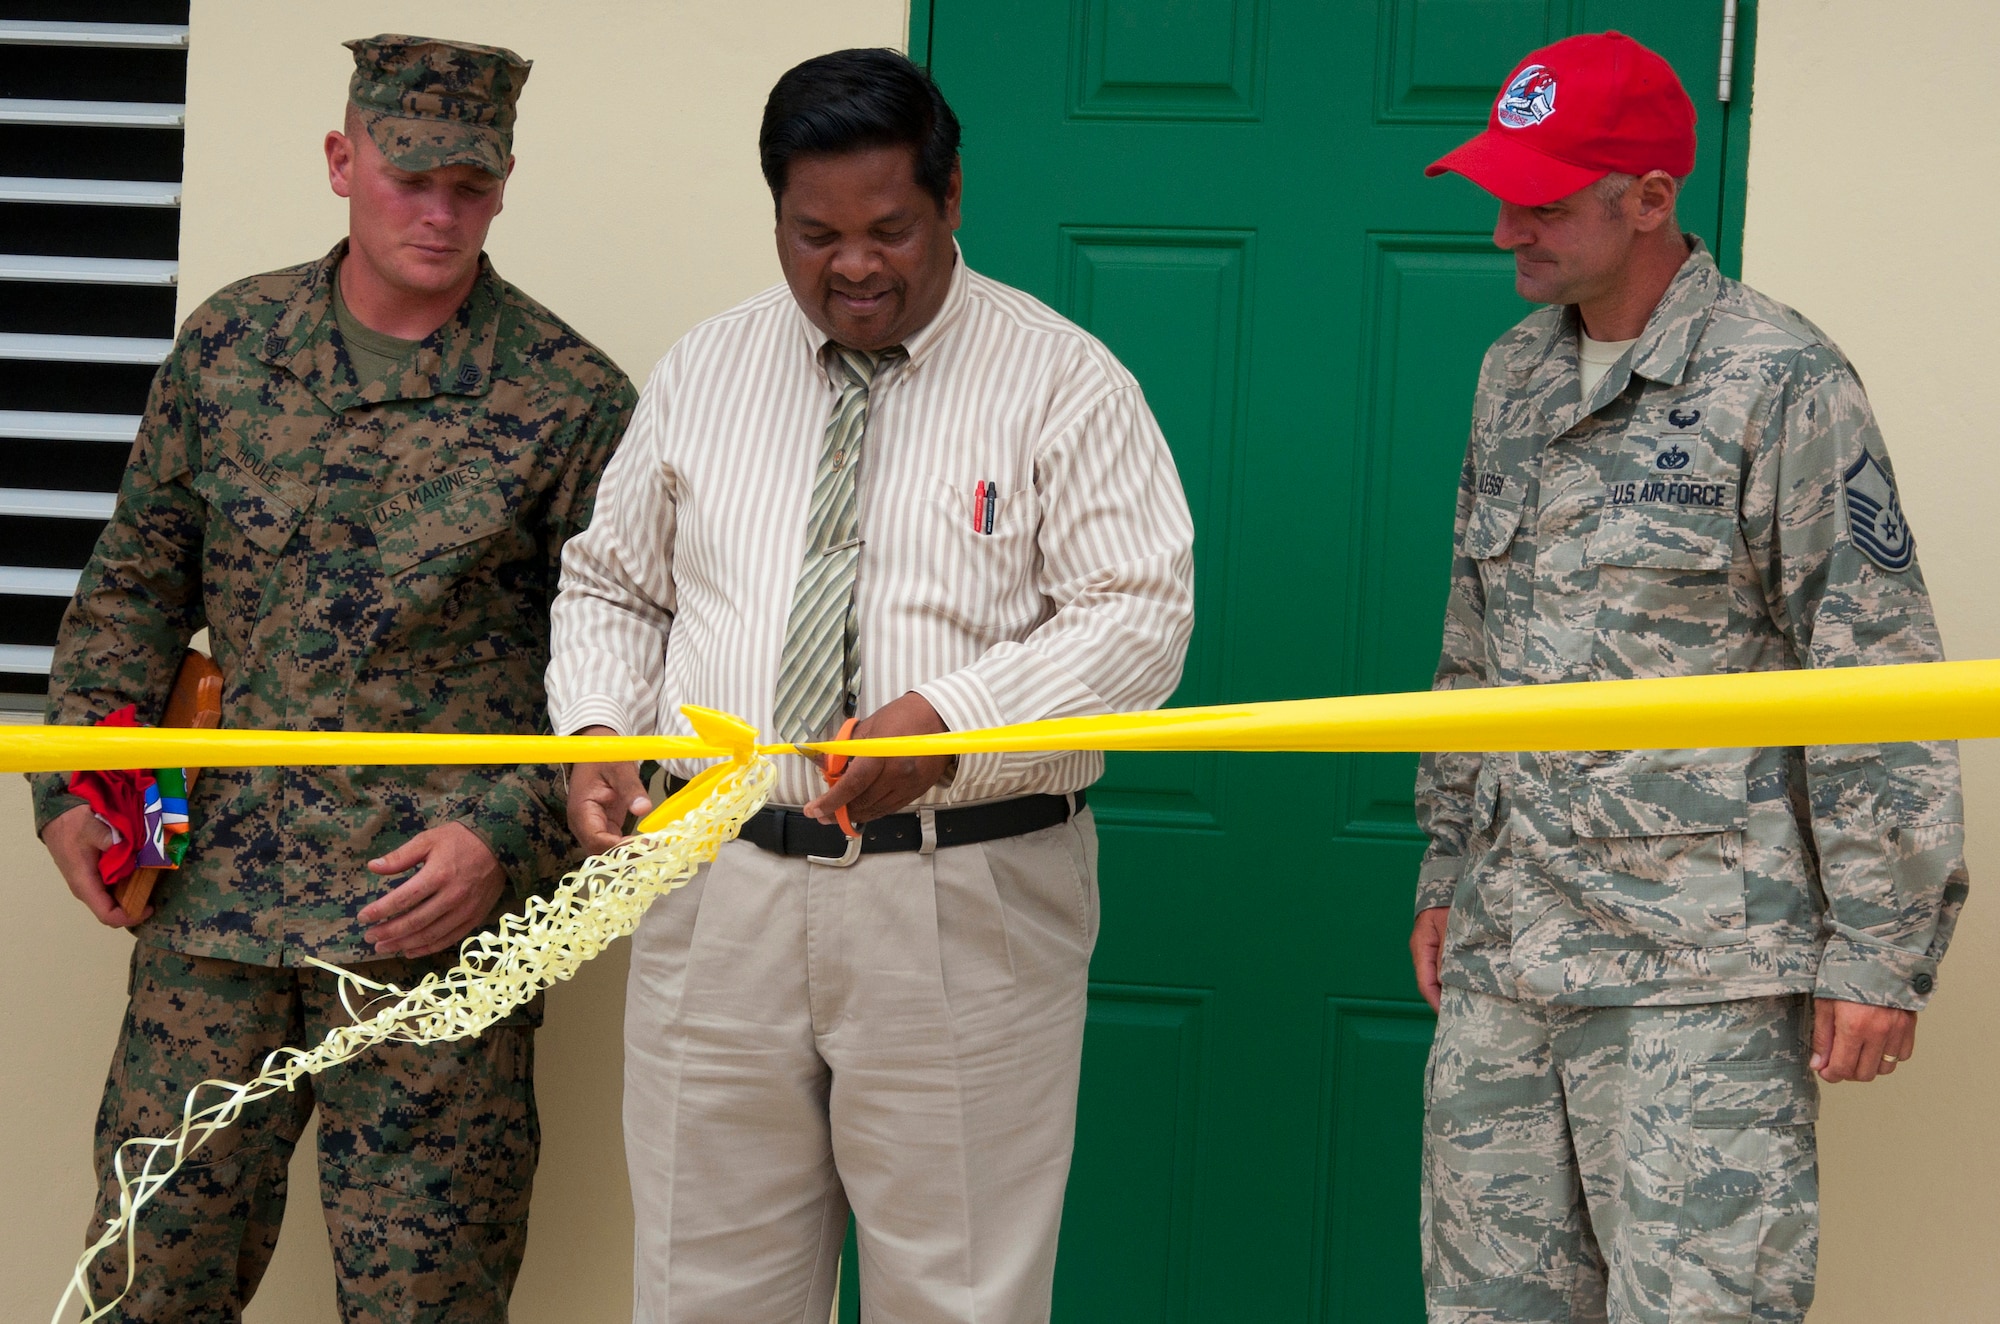 Rodrick Cardinez, Edward P. Yorke school principal, center, cuts the ribbon to officially open the school addition with U.S. Marine Corps Staff Sgt. Matt Houle, construction site foreman, left, and U.S. Air Force Master Sgt. Nicholas Alessi, construction site project manager, right, during the ribbon cutting ceremony June 4, 2014, at the school in Belize City, Belize. The school's 1,372 square foot, two-classroom addition is one of five New Horizons projects constructed in the country. New Horizons is an annual multinational exercise that provides training opportunities in civil engineering and medical care. (U.S. Air Force photo by Tech. Sgt. Kali L. Gradishar/Released)